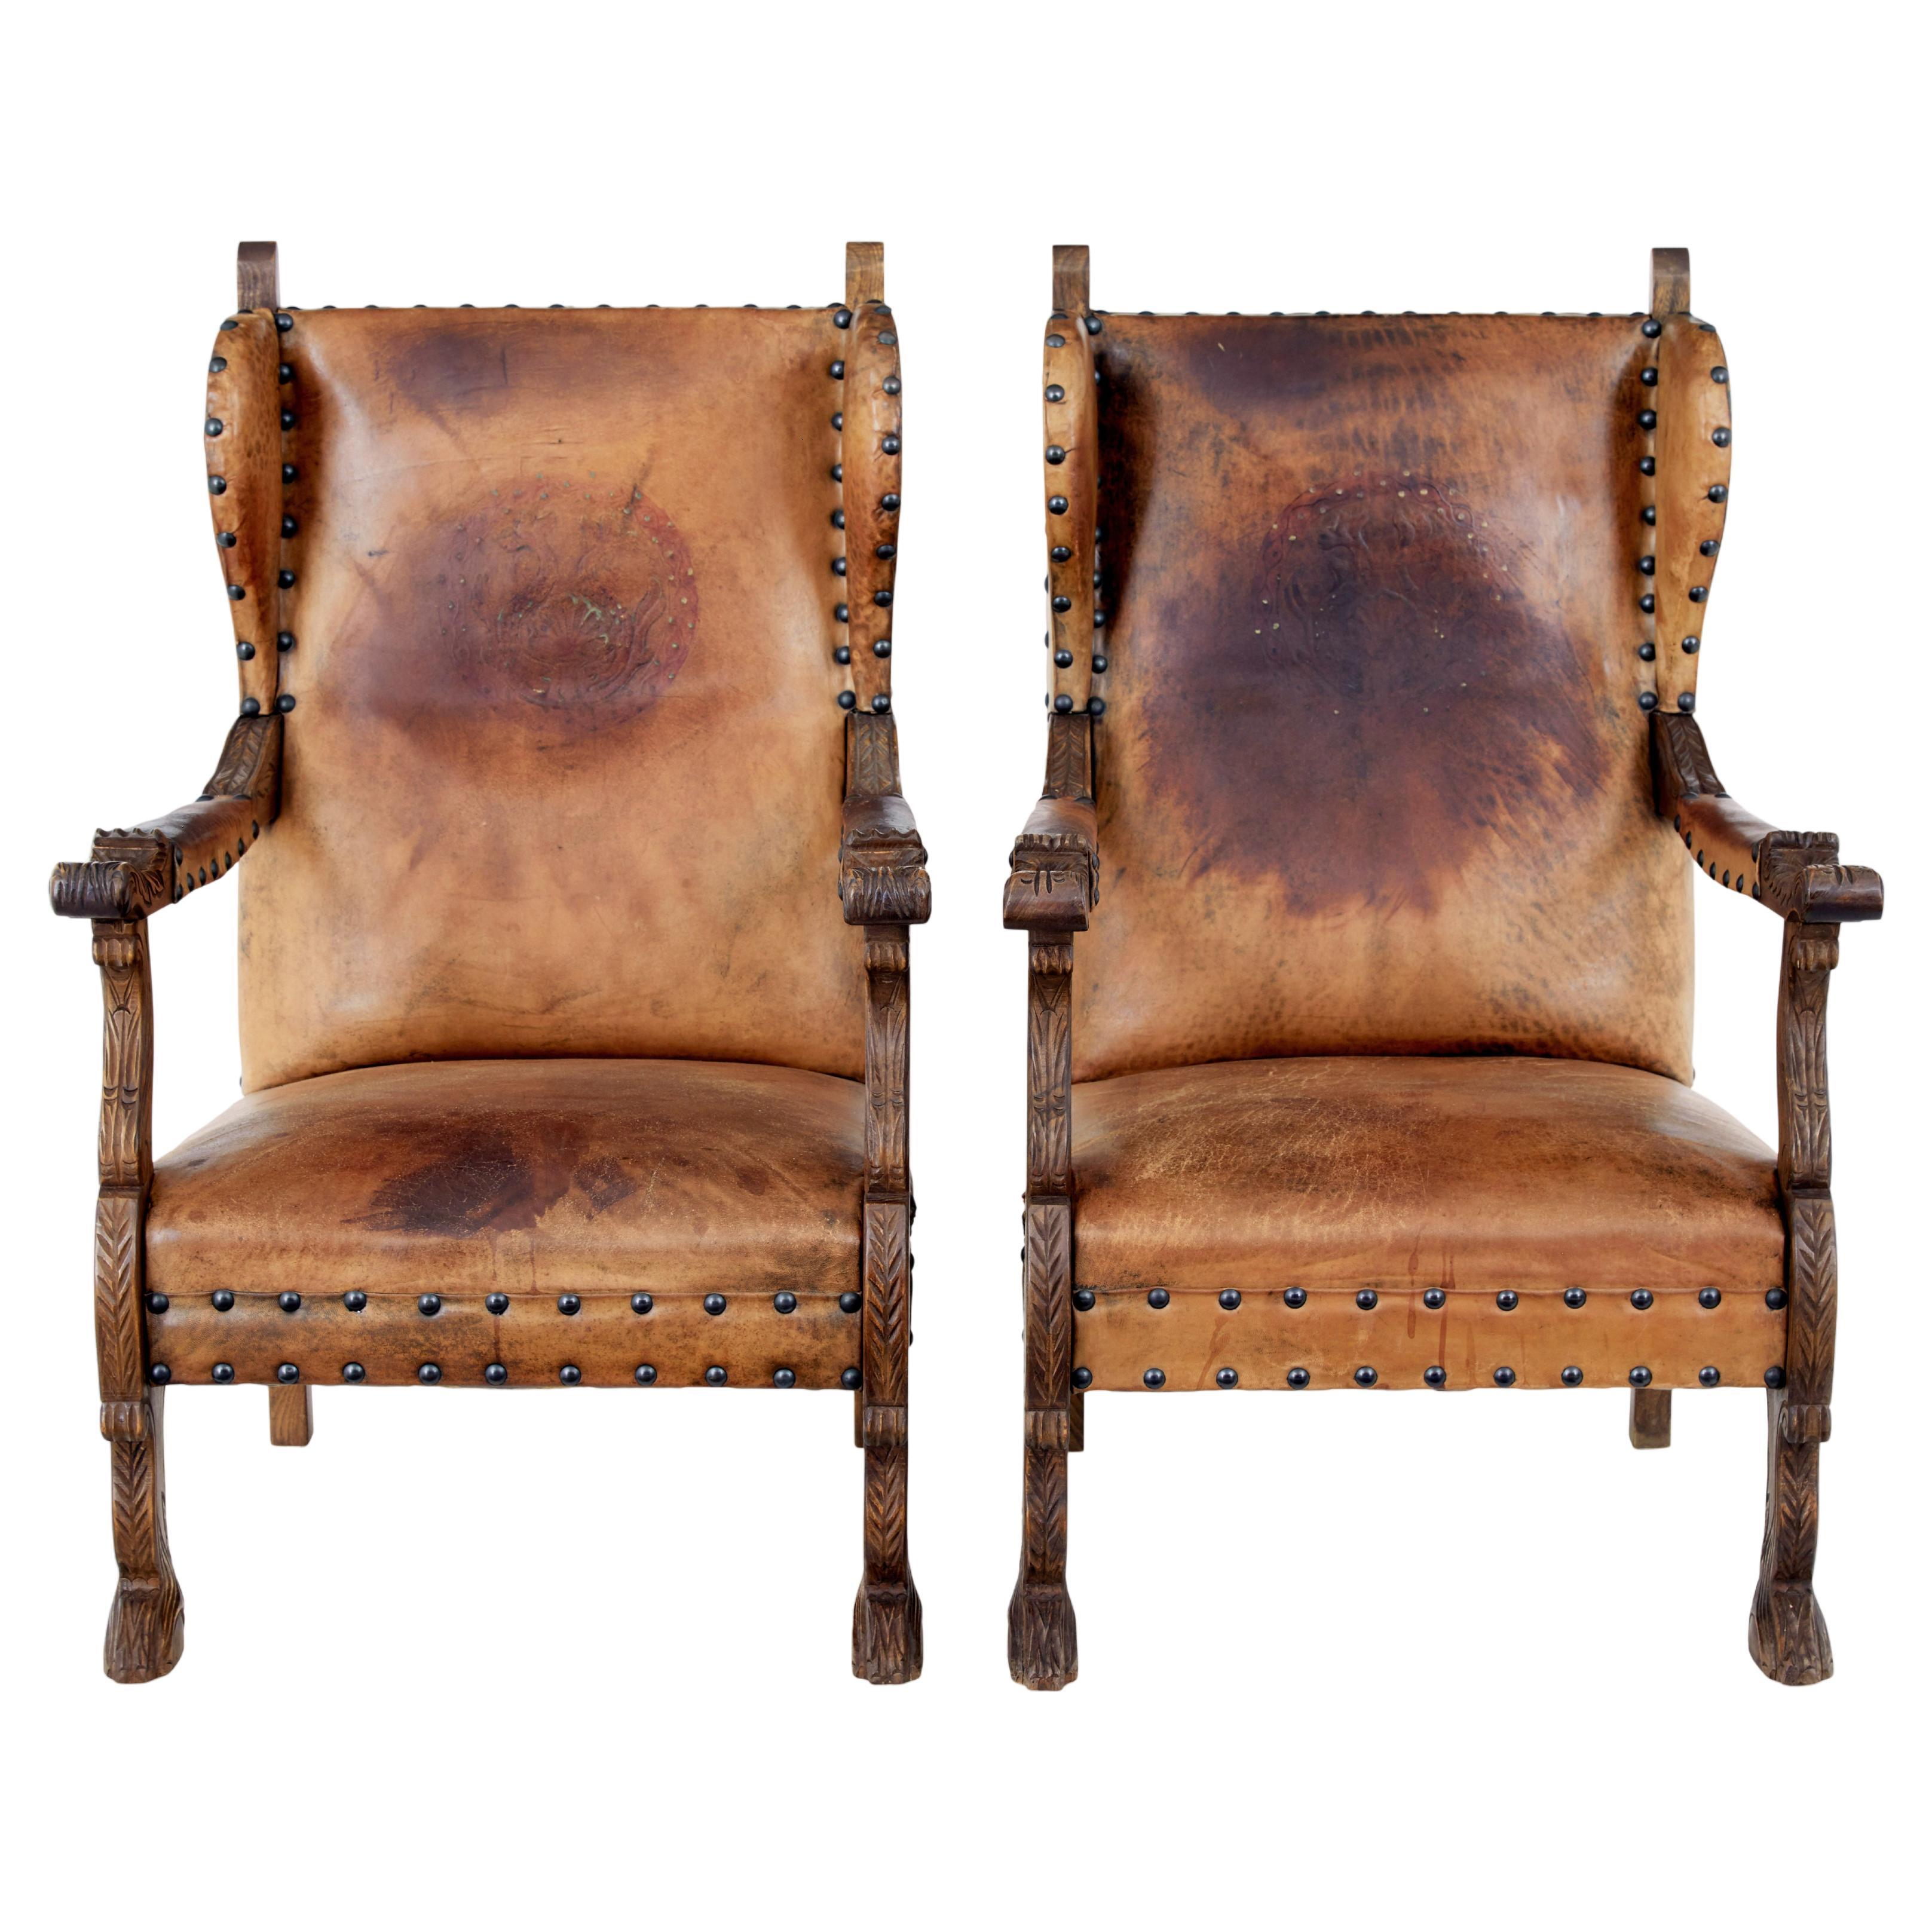 Pair of 19th century carved oak and leather armchairs